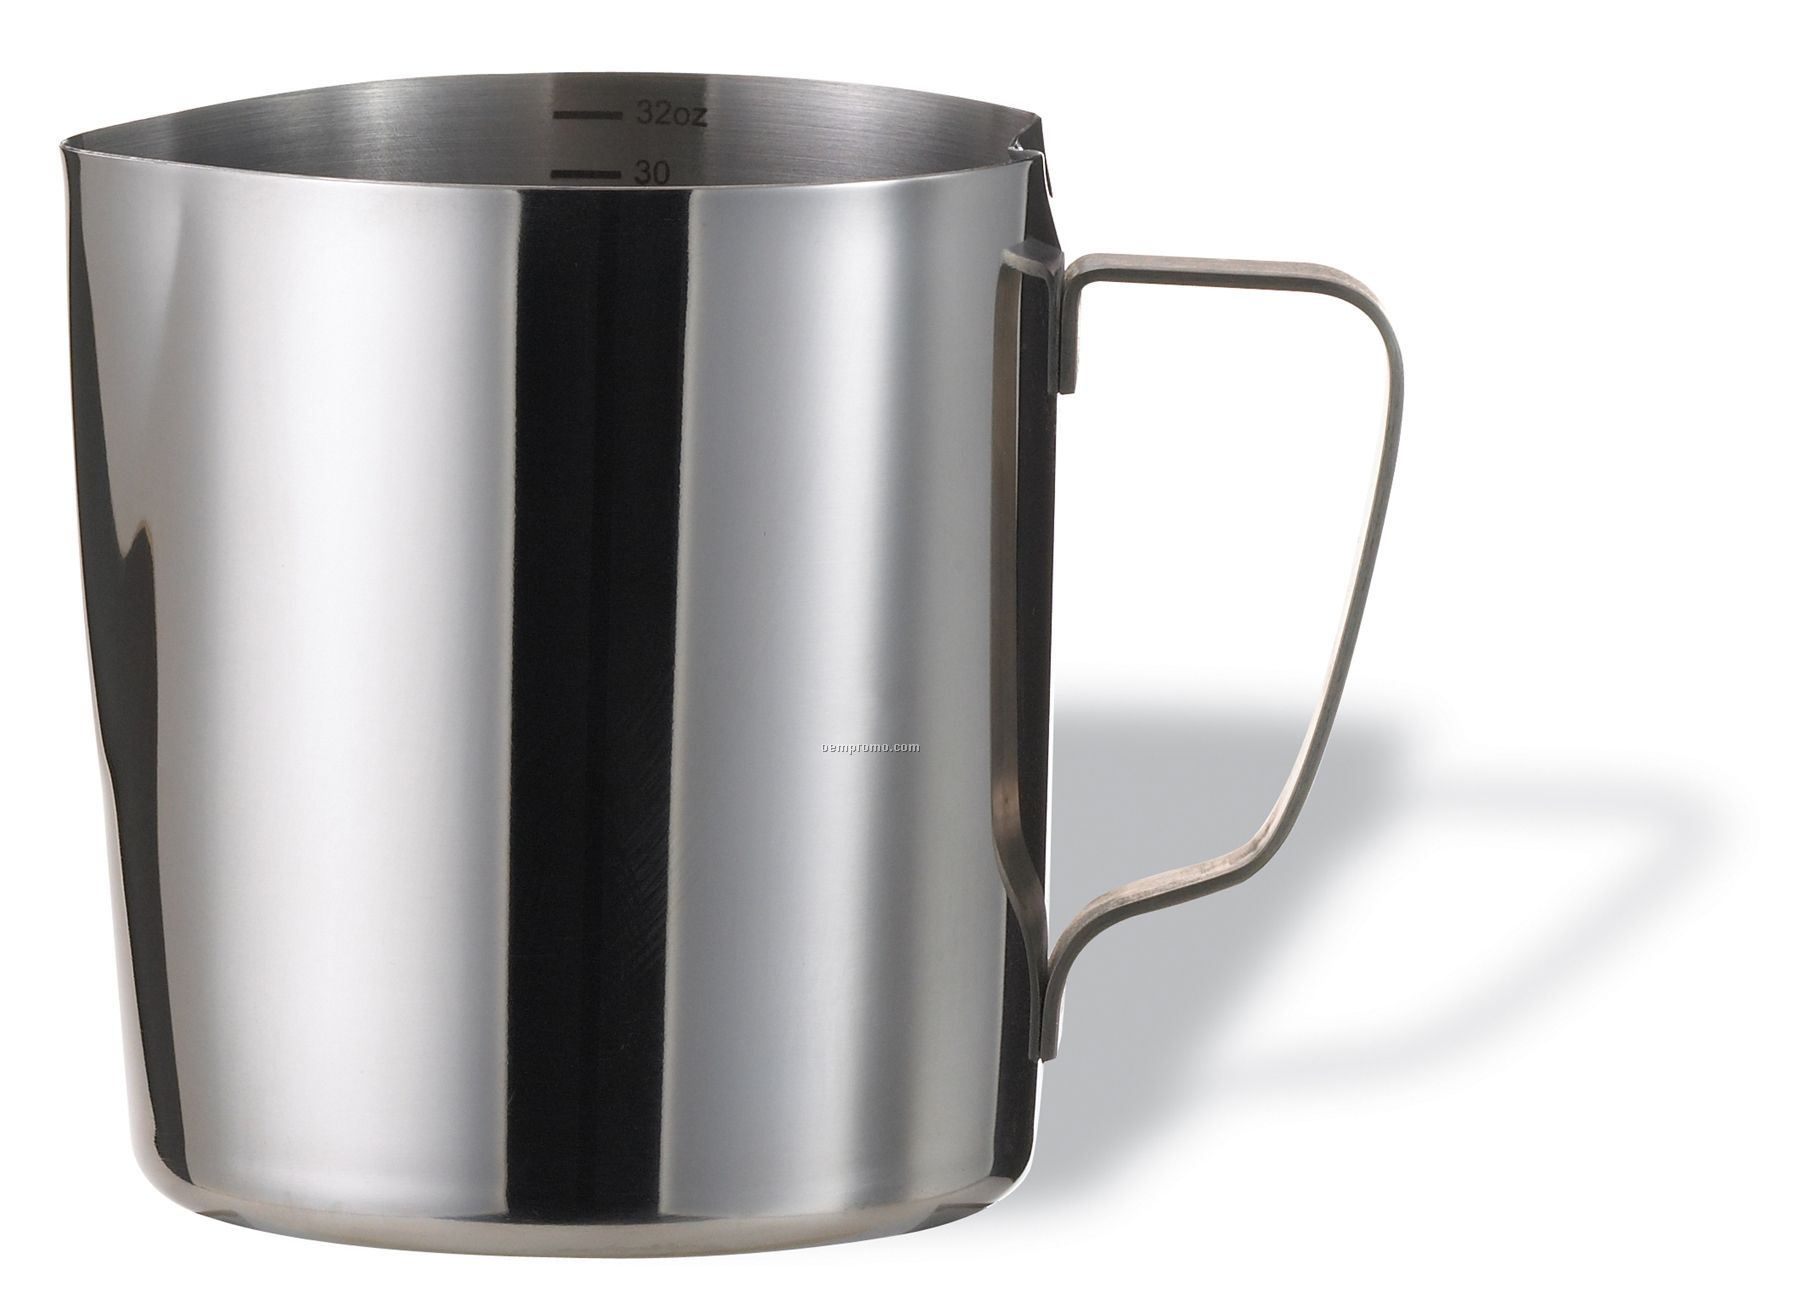 0.6 Liter Stainless Steel Frothing Pitcher